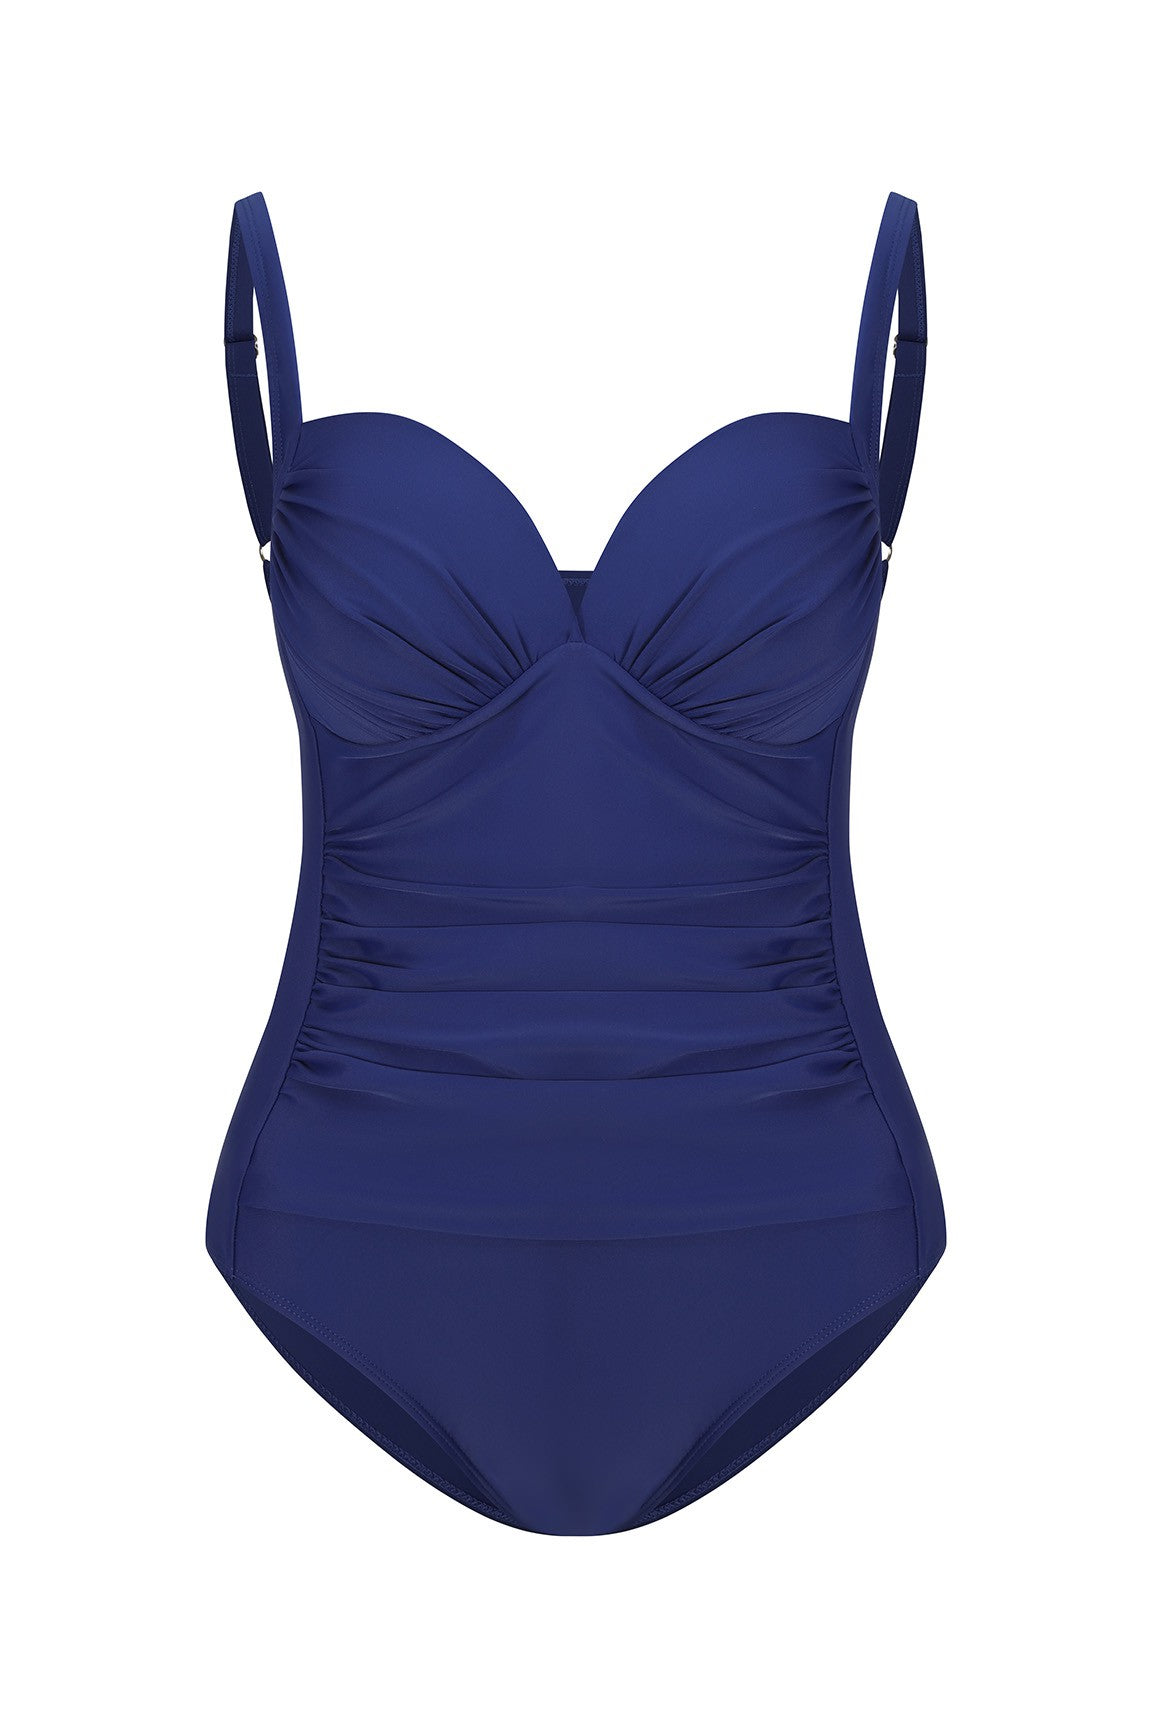 Swimsuit With Adjustable Shoulder Straps And Rouching | NU NAVY | 0709 ...